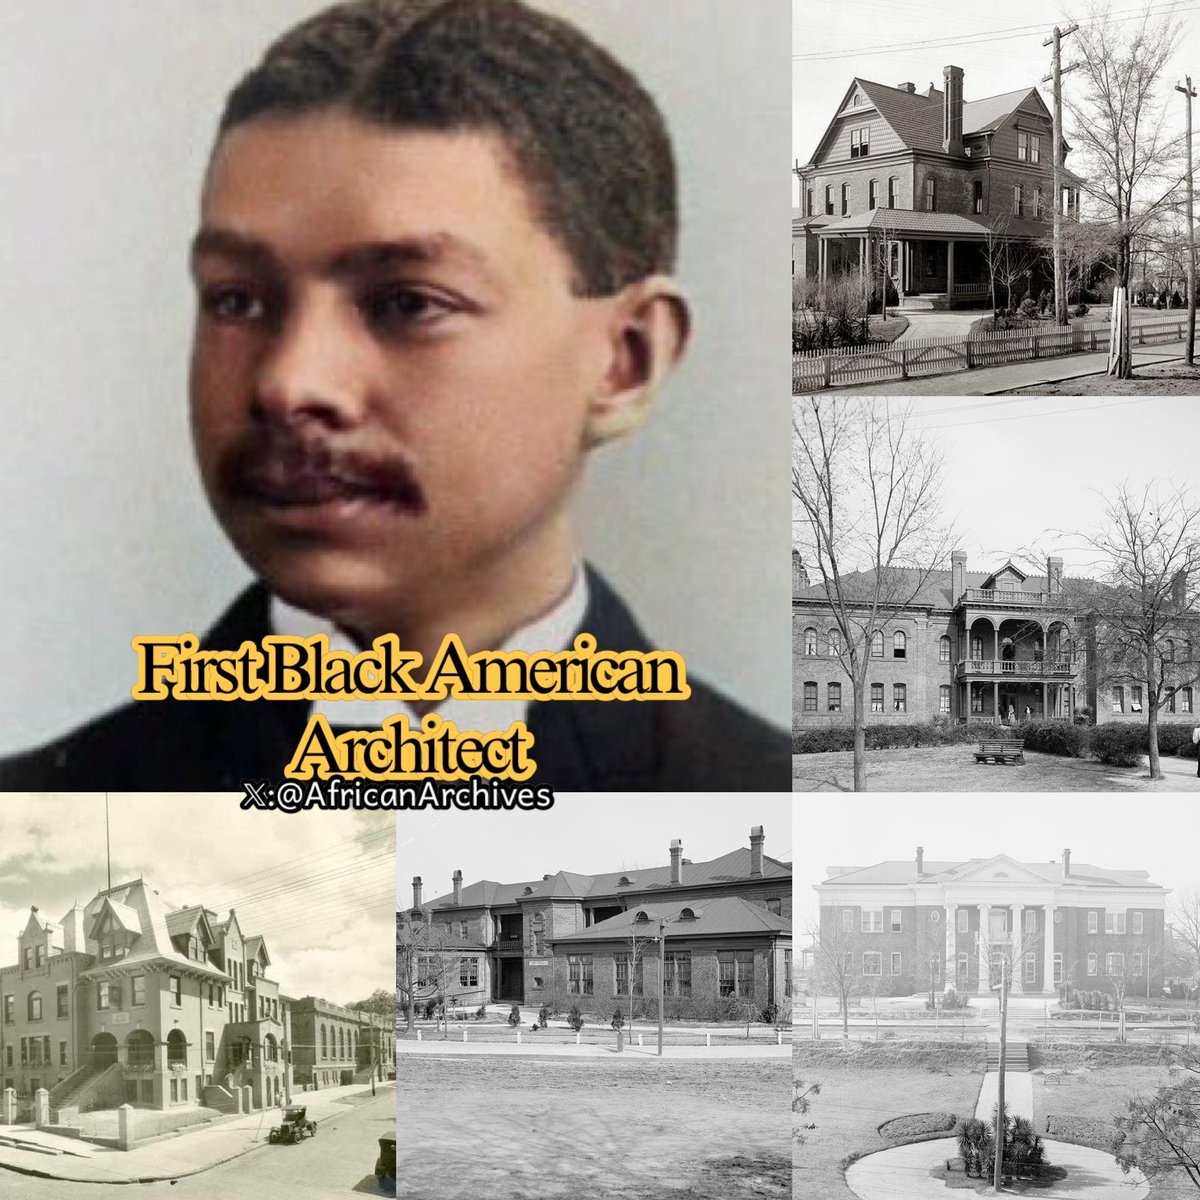 The first black American architect to graduate from MIT and the country’s first academically trained black architect, Robert R. Taylor was truly groundbreaking. Born in North Carolina in 1868, he learned carpentry and construction from his father, a former slave, and worked as a